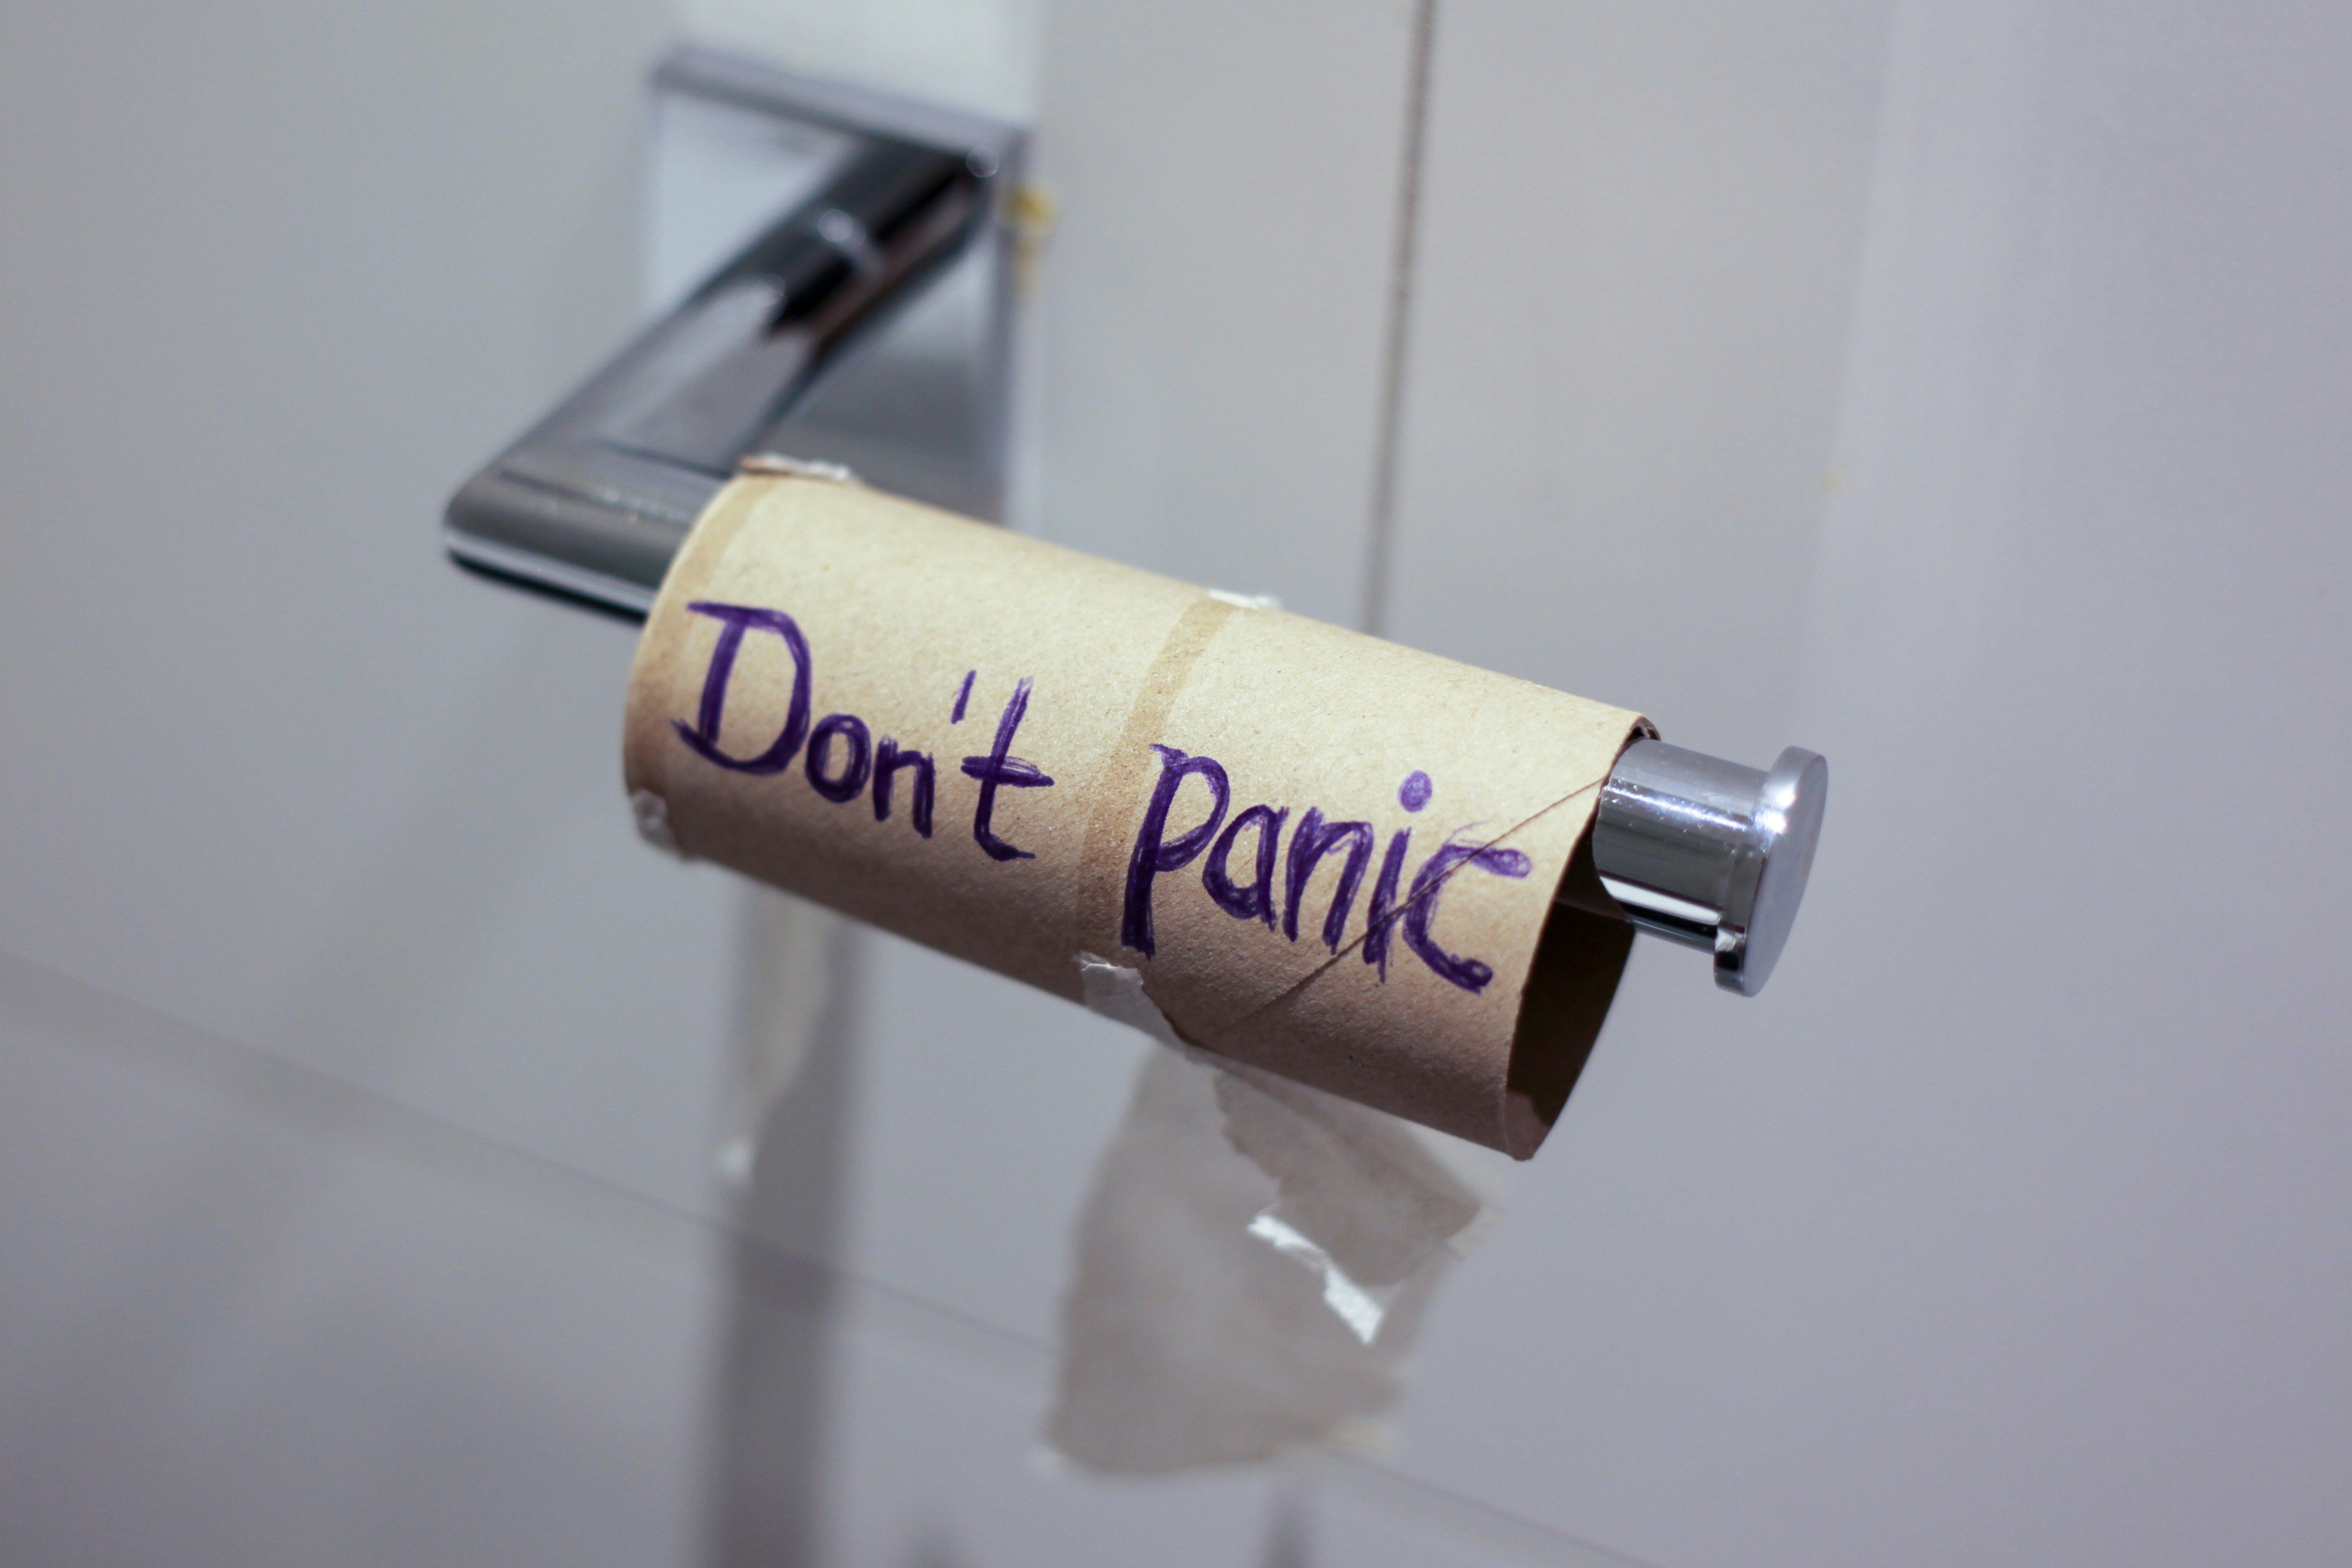 A Picture Showing the Words "Don't Panic" in large letters